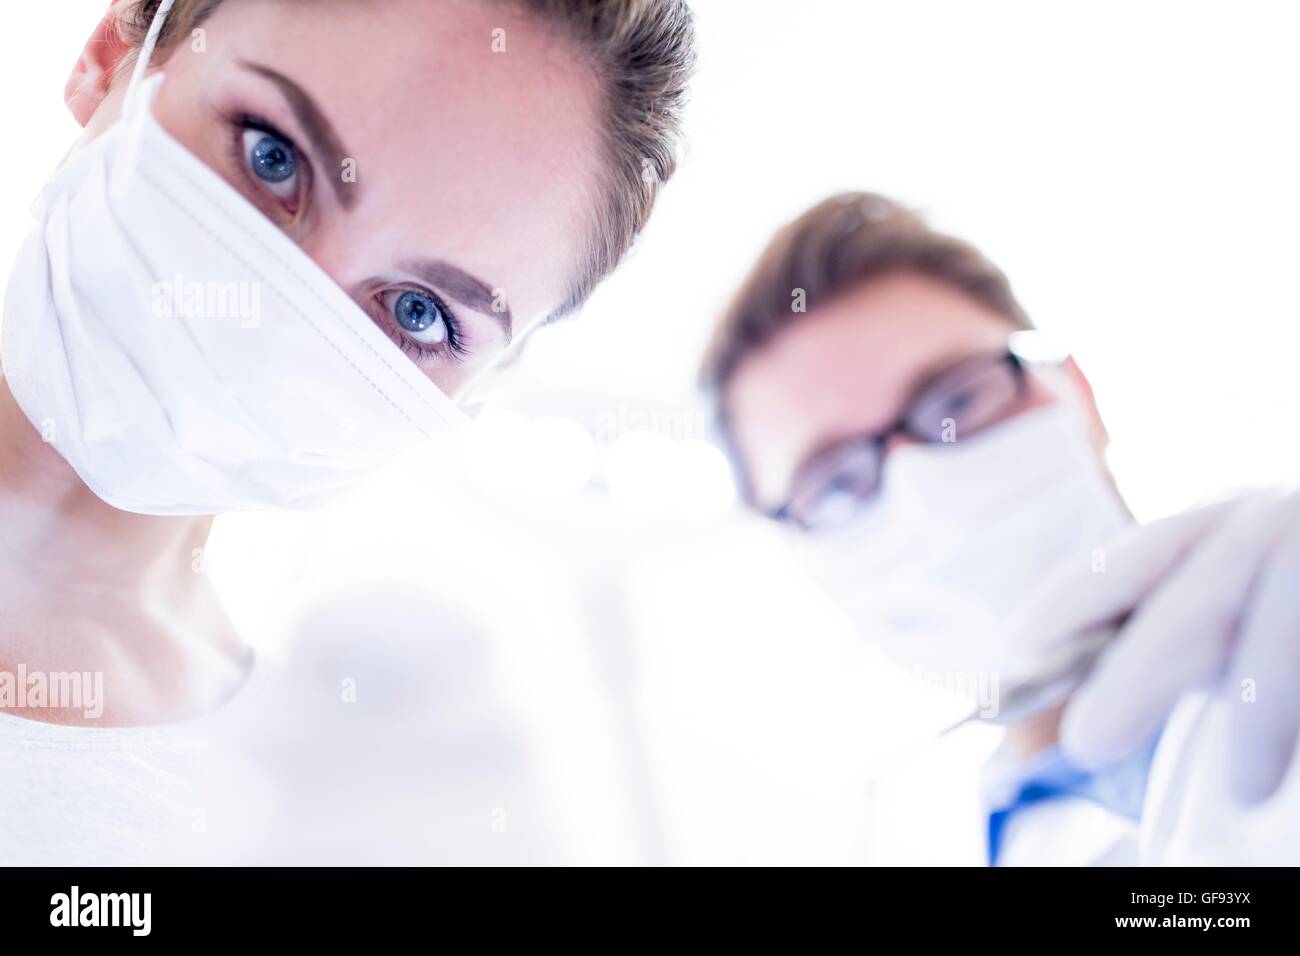 MODEL RELEASED. Dentist and dental assistant holding angled mirror. Stock Photo